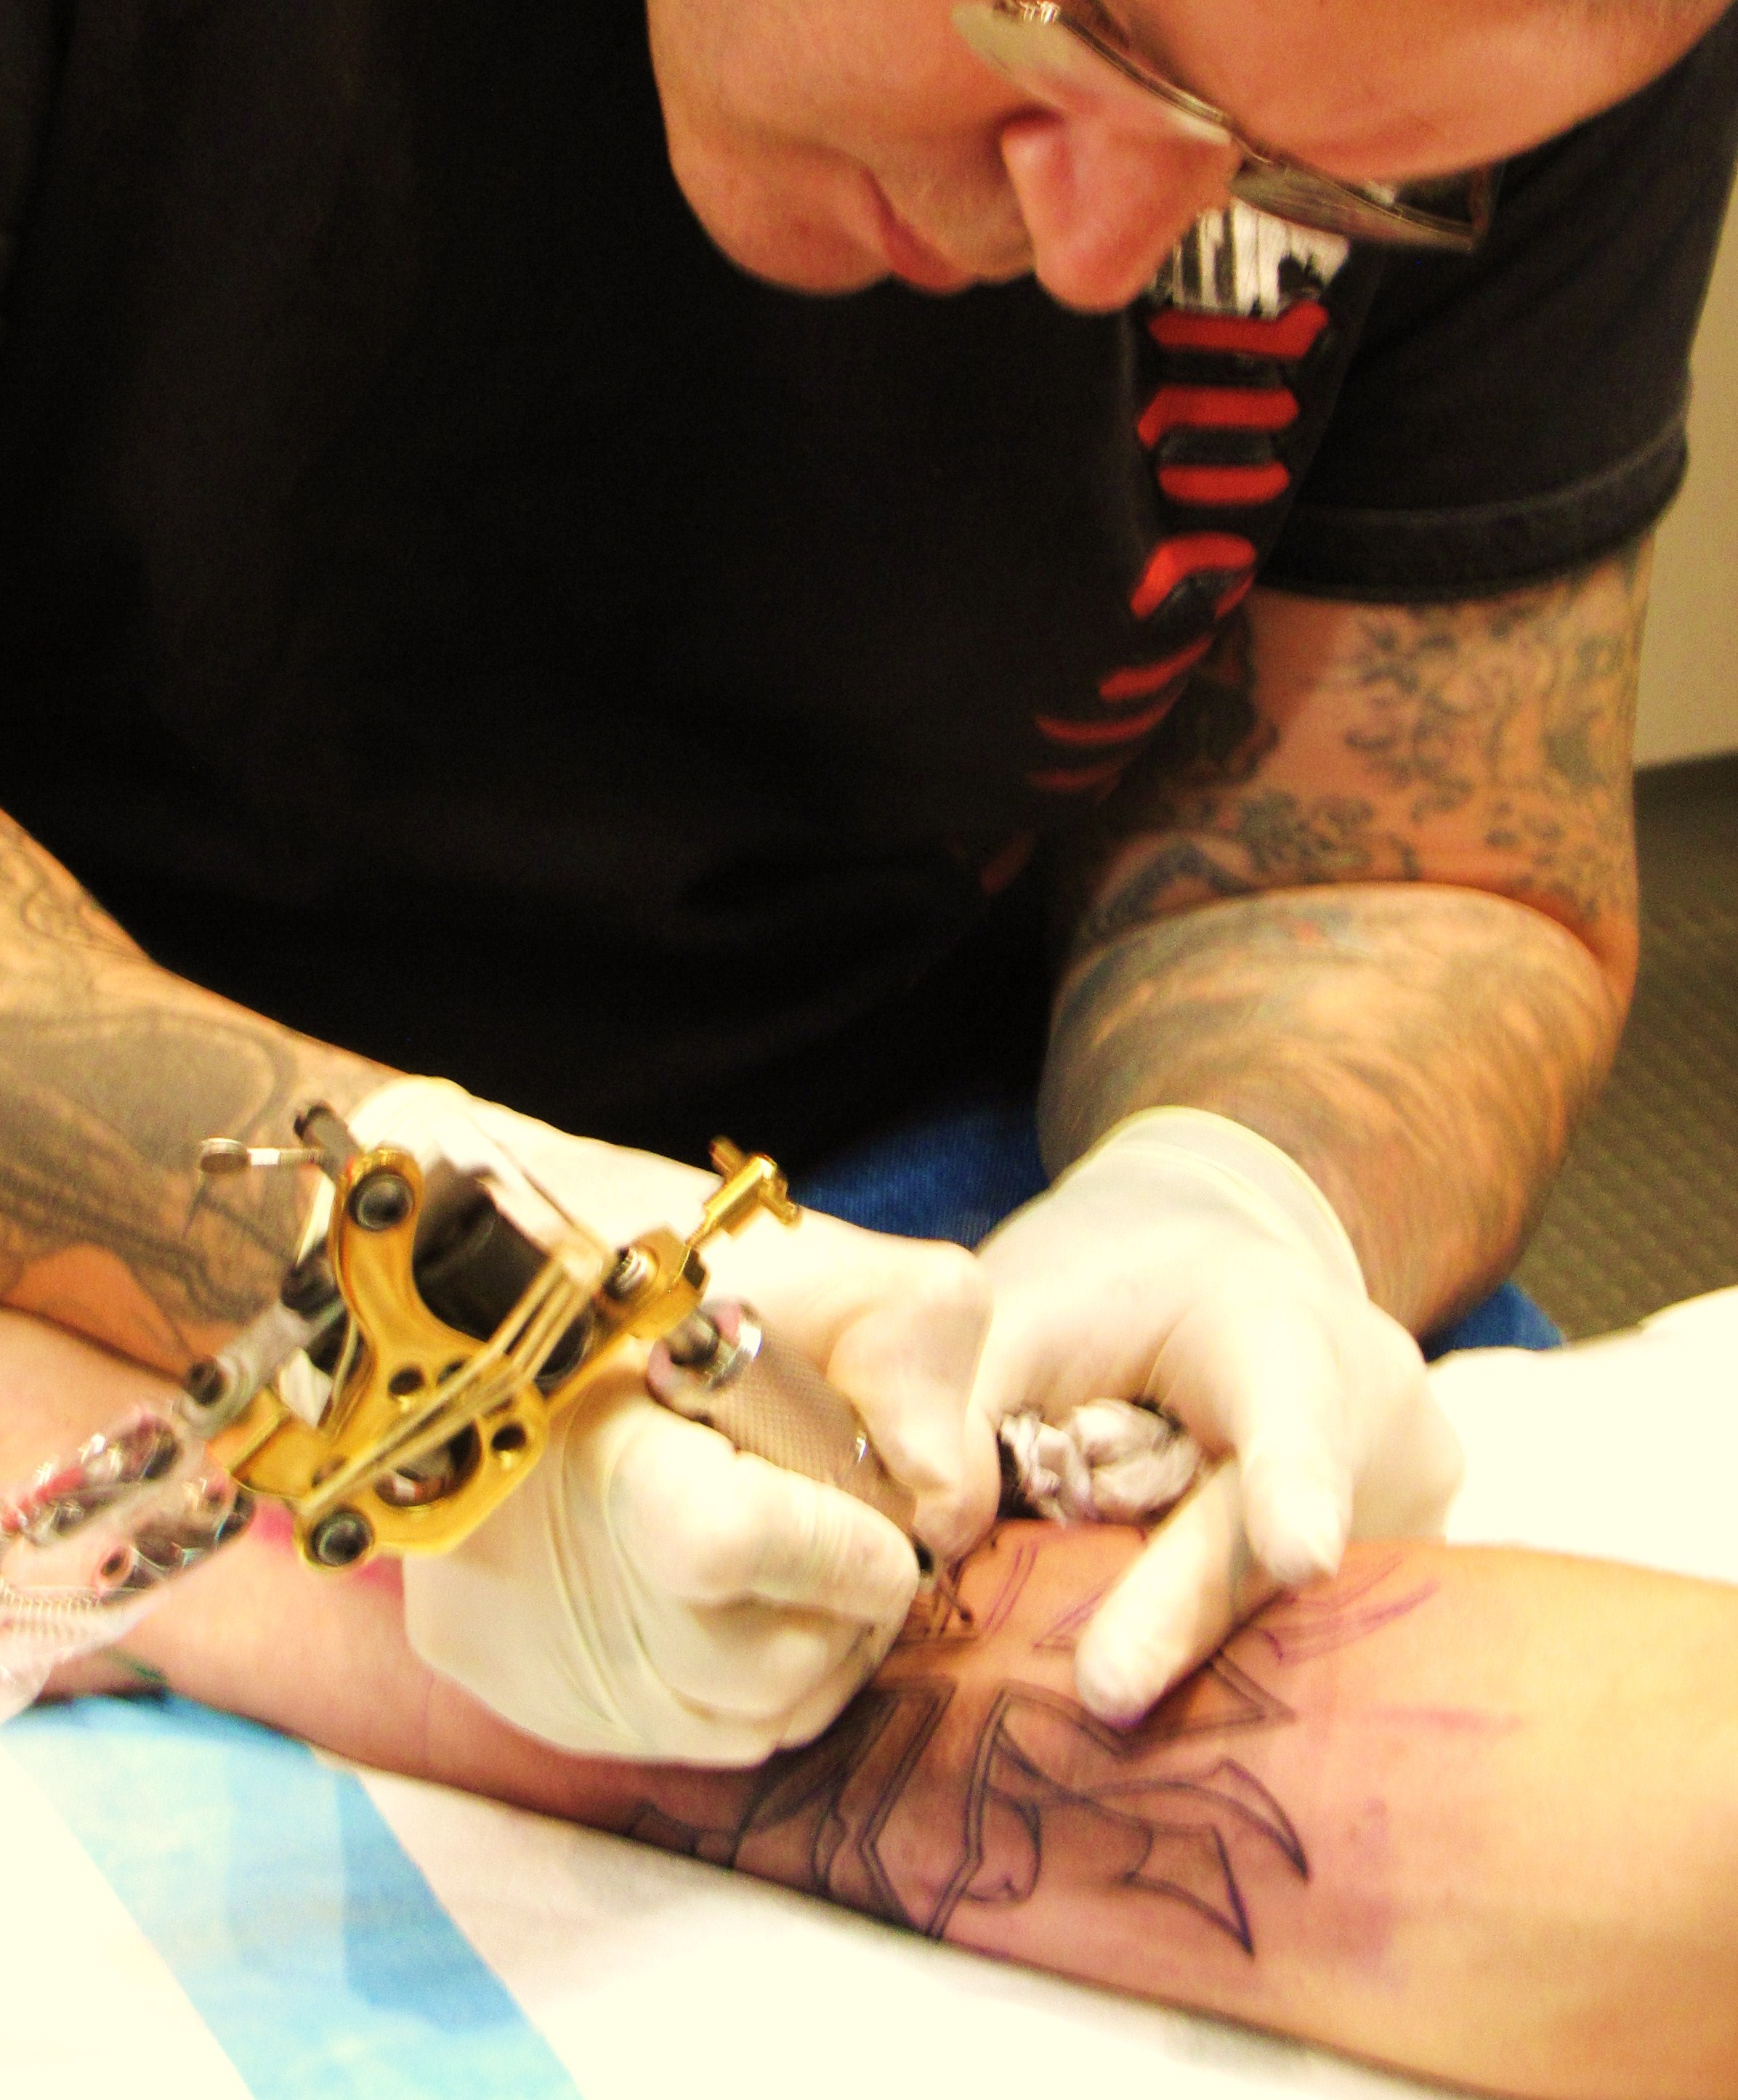 A tattoo artist at work in